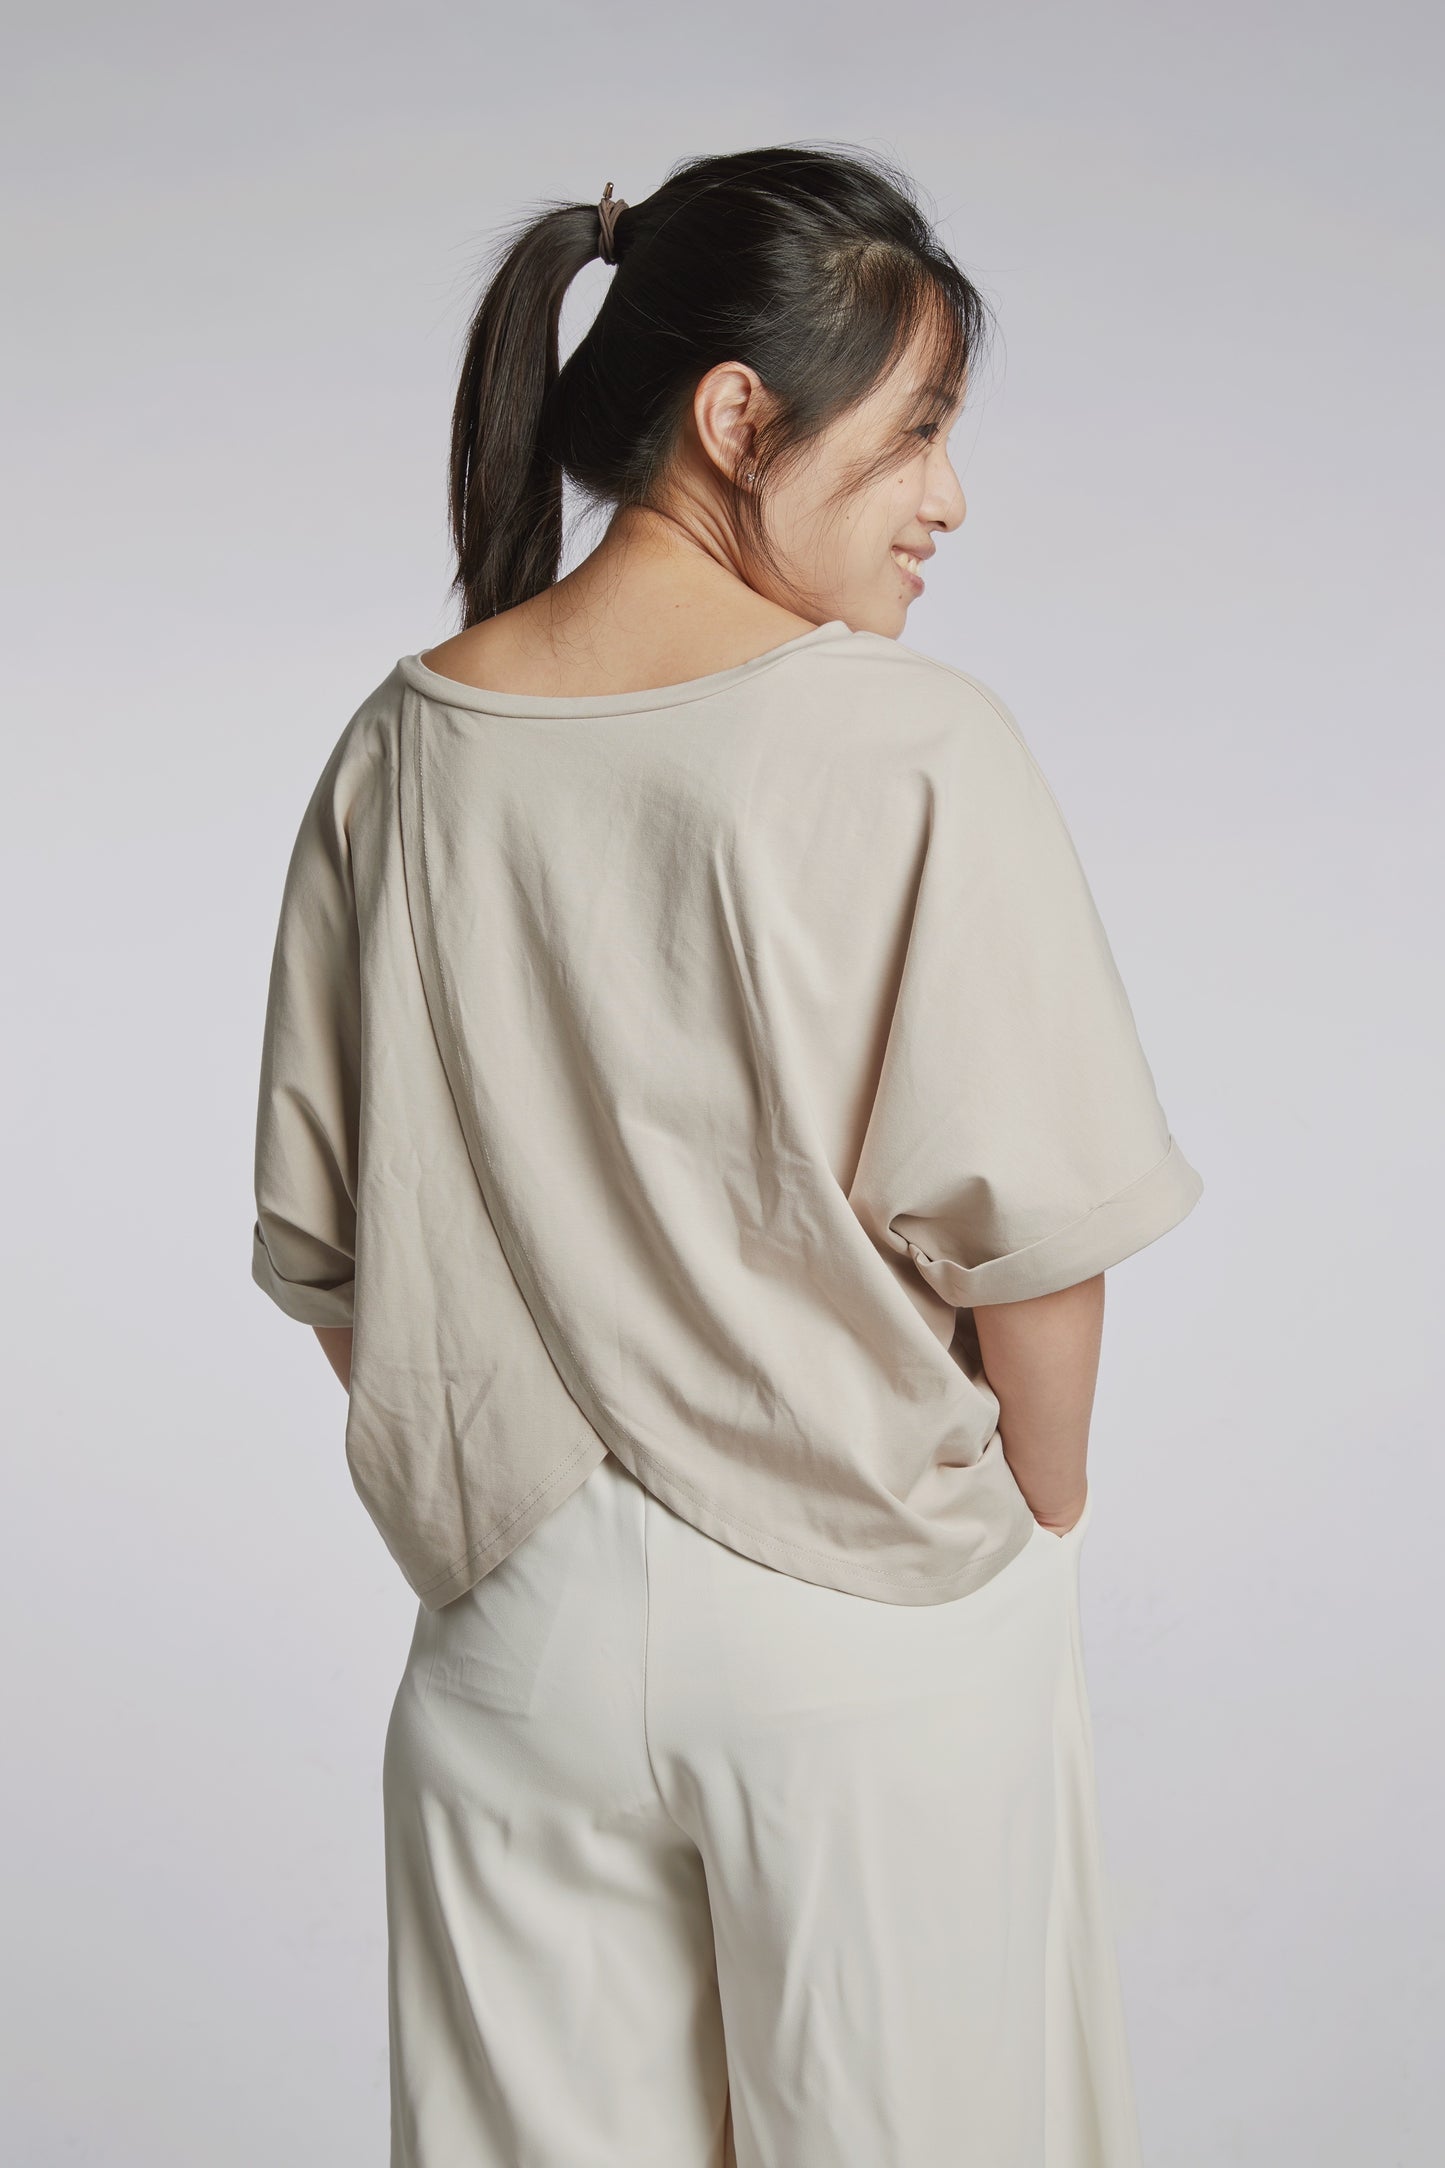 [New XL Size!] A Mighty Top In Latte Brown